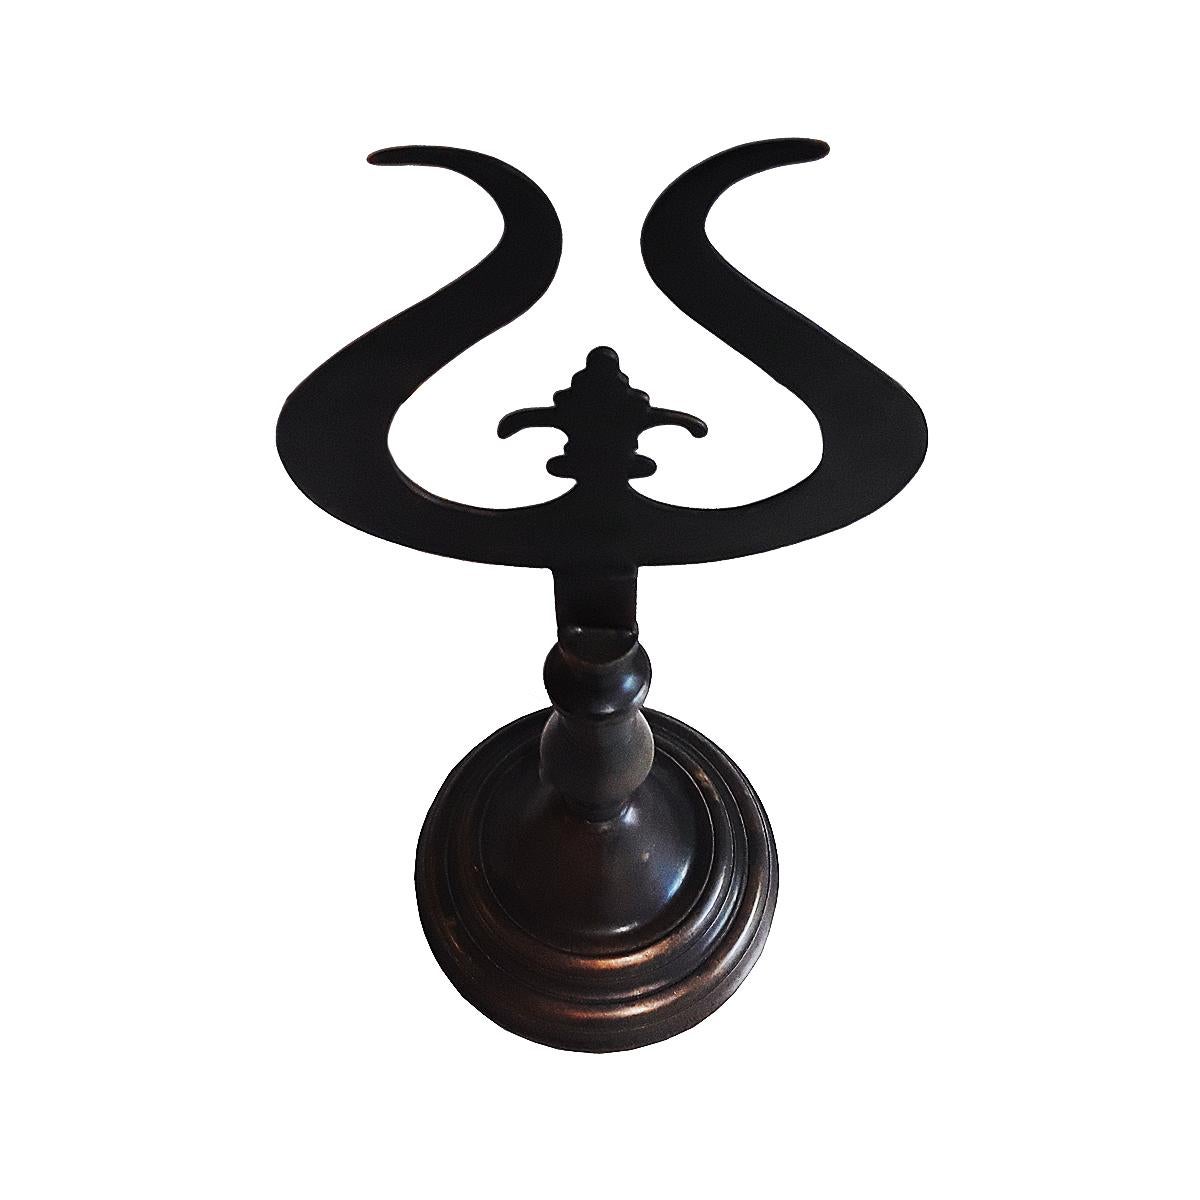 A cast brass Finial from Turkey, mounted on a circular base. Measures: 18 1/4